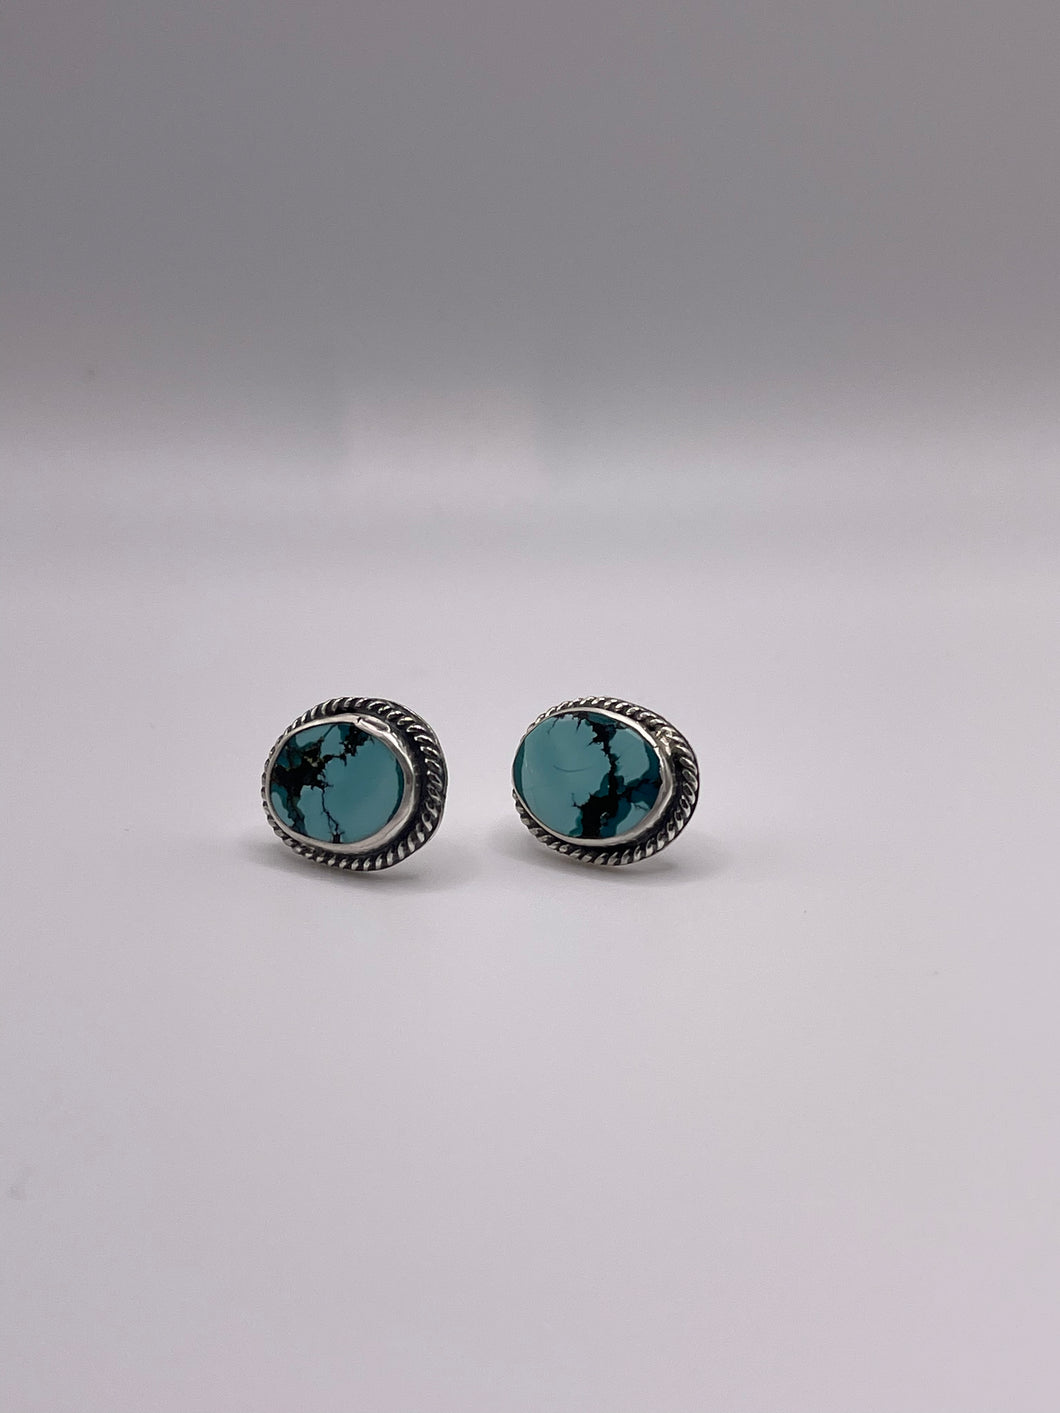 BW- Hubei Turquoise Studs (More Blue)